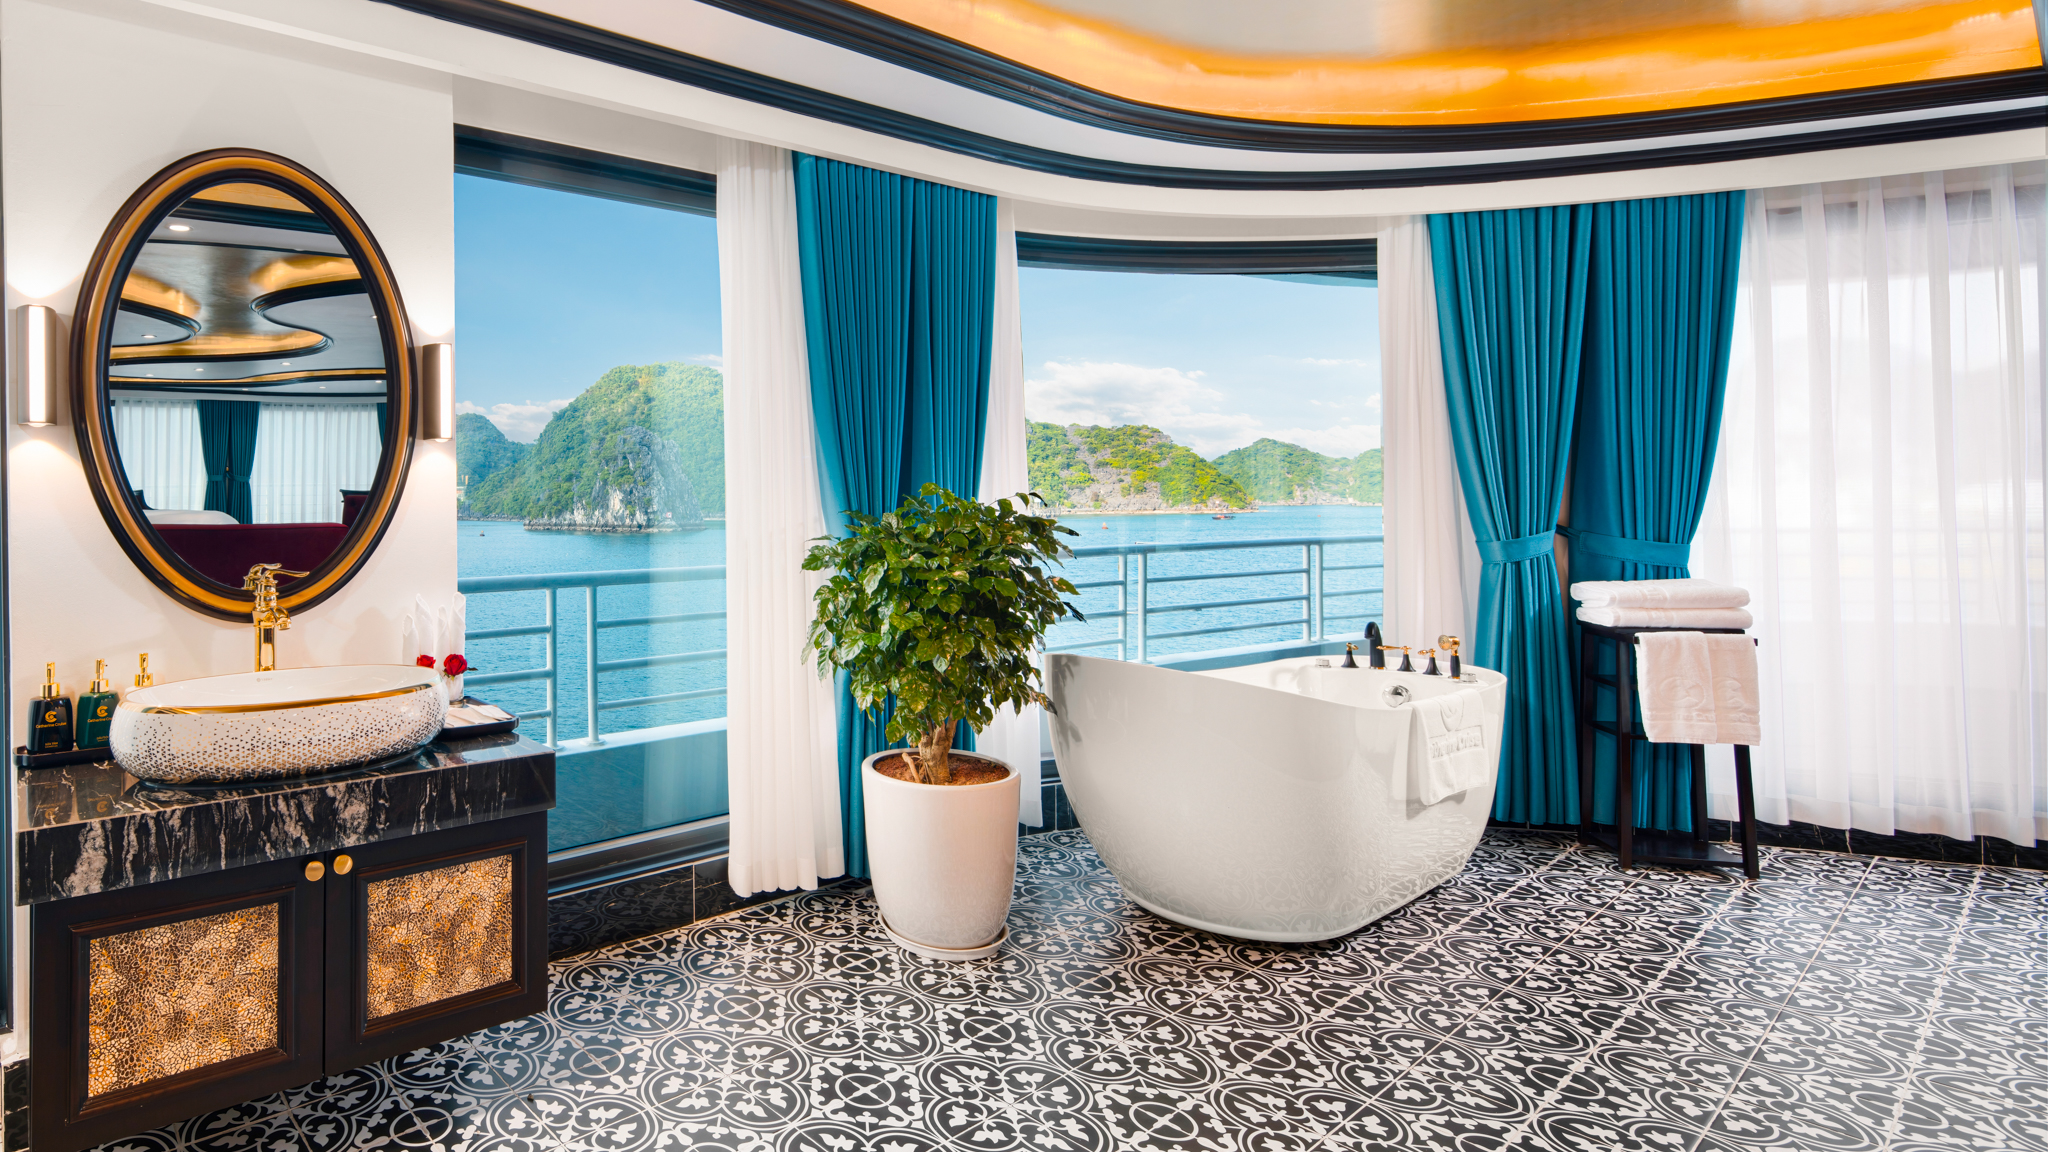 Jacuzzi bathtub with Halong Bay view